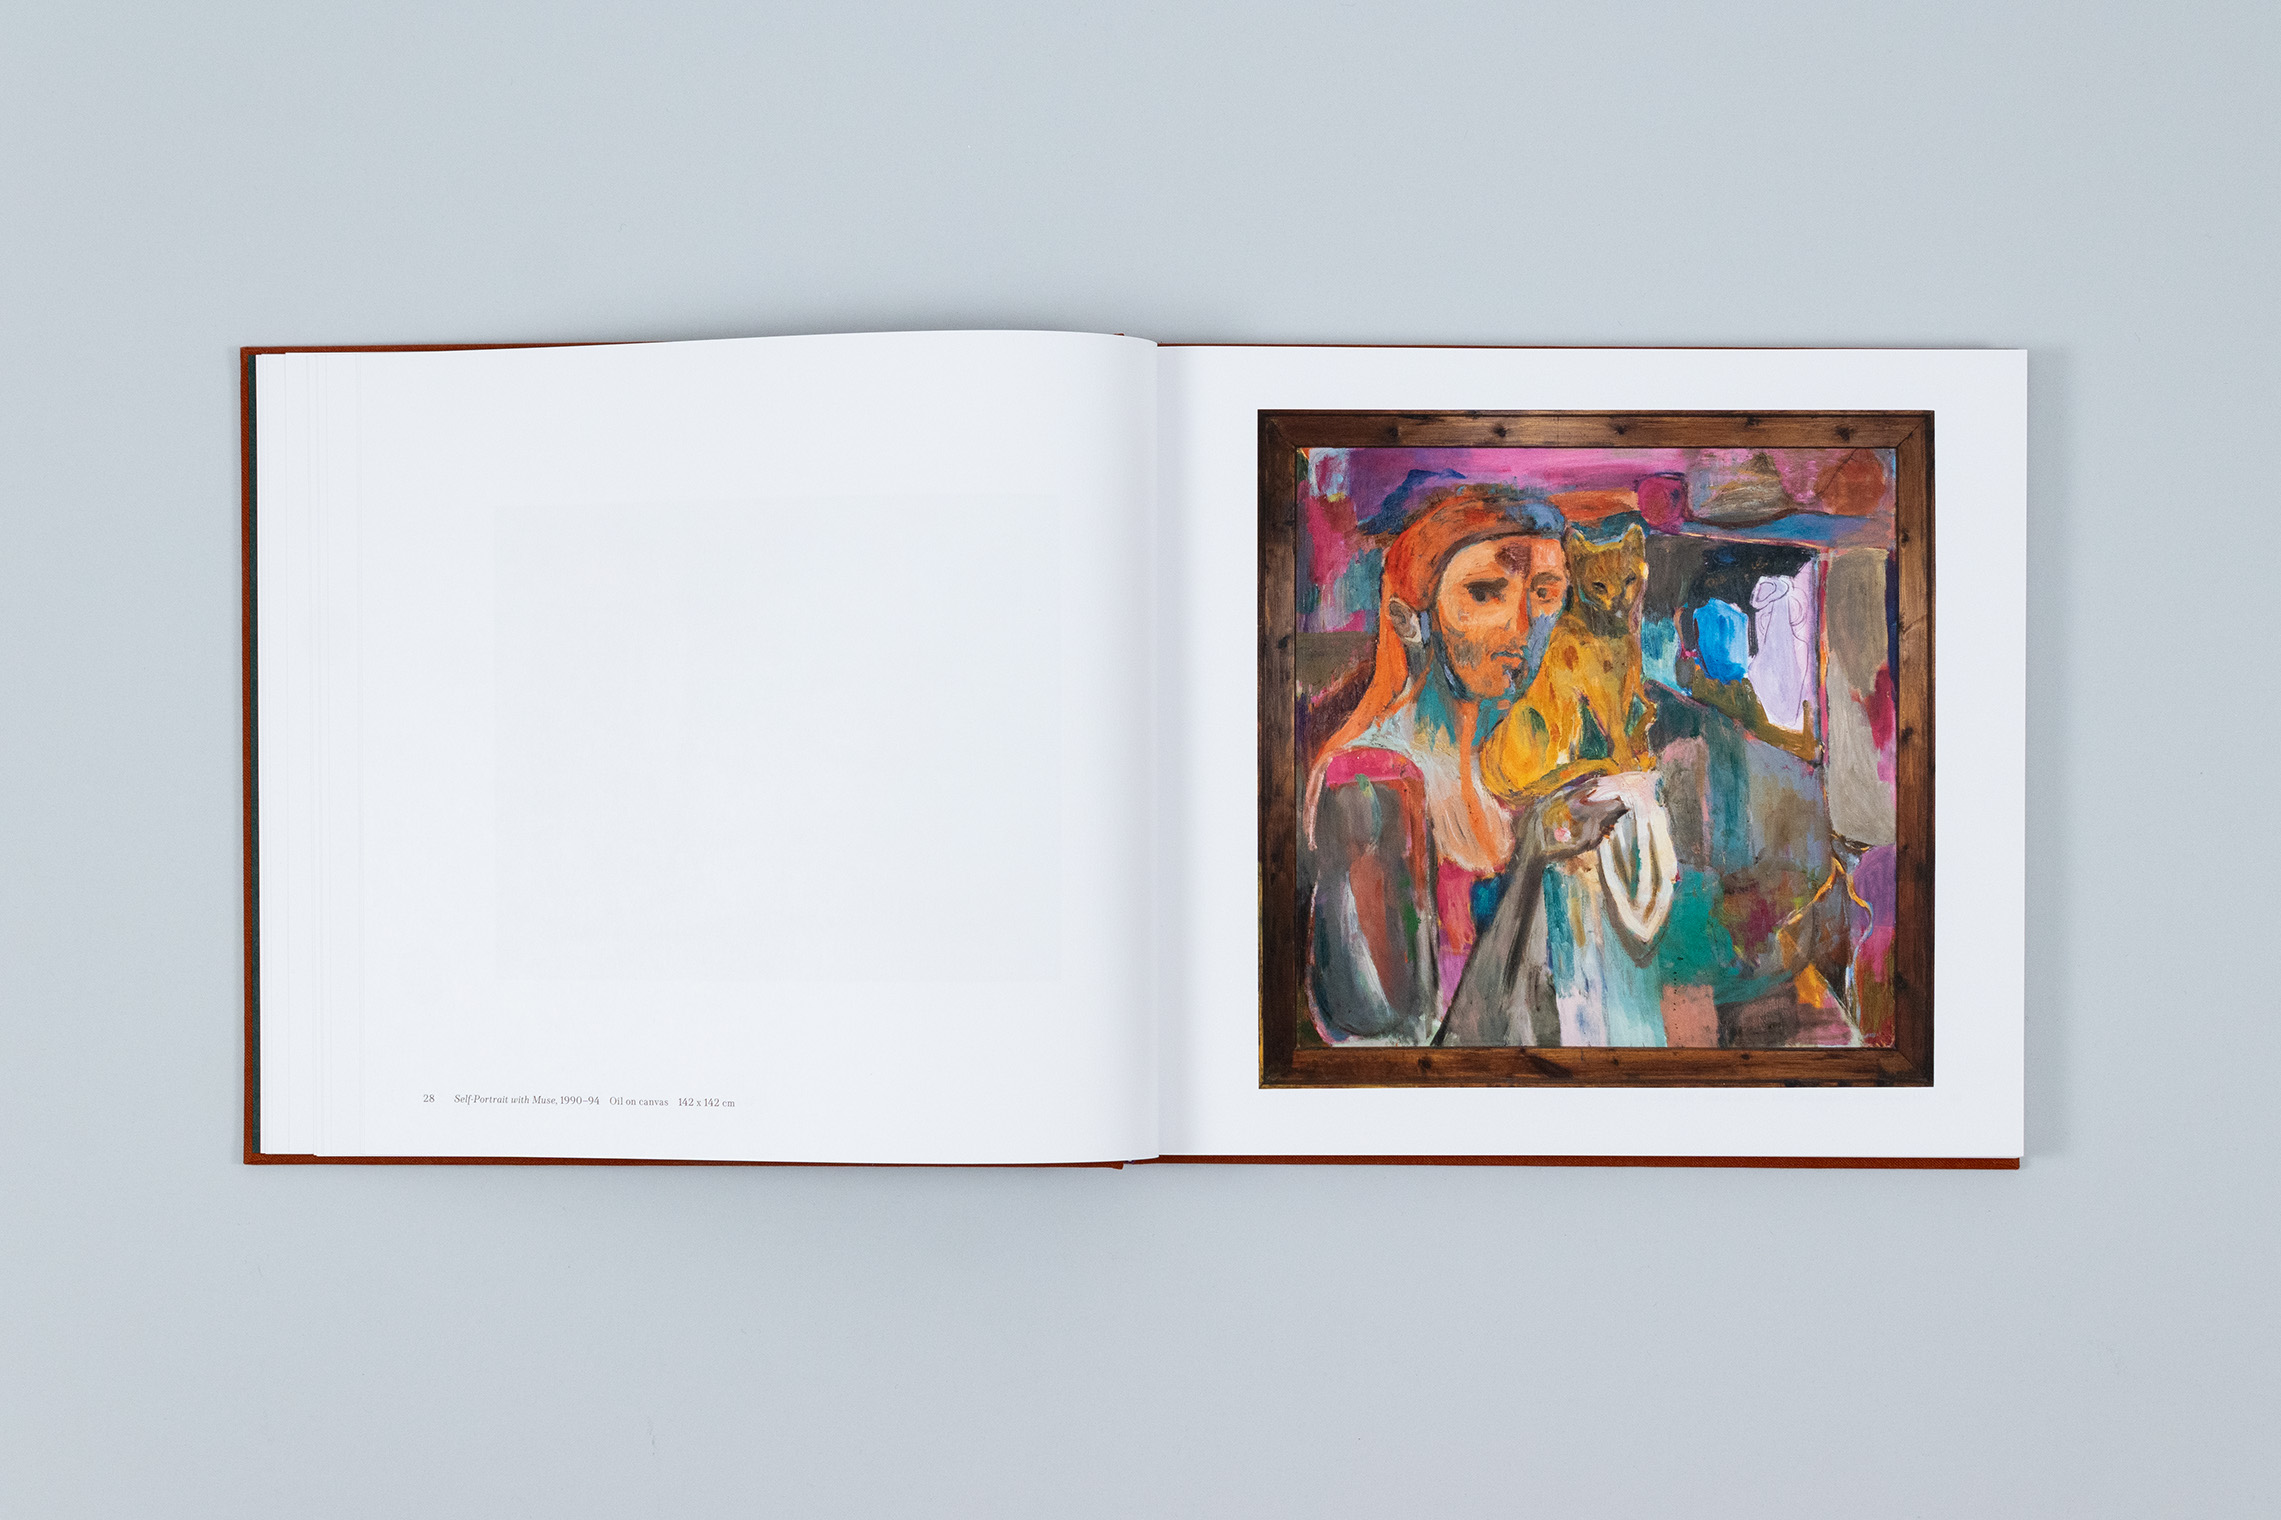 Carole Gibbons monograph spread featuring the large square format oil painting Self-Portrait with Muse, a colourful rendering of Gibbons holding her cat Orangie